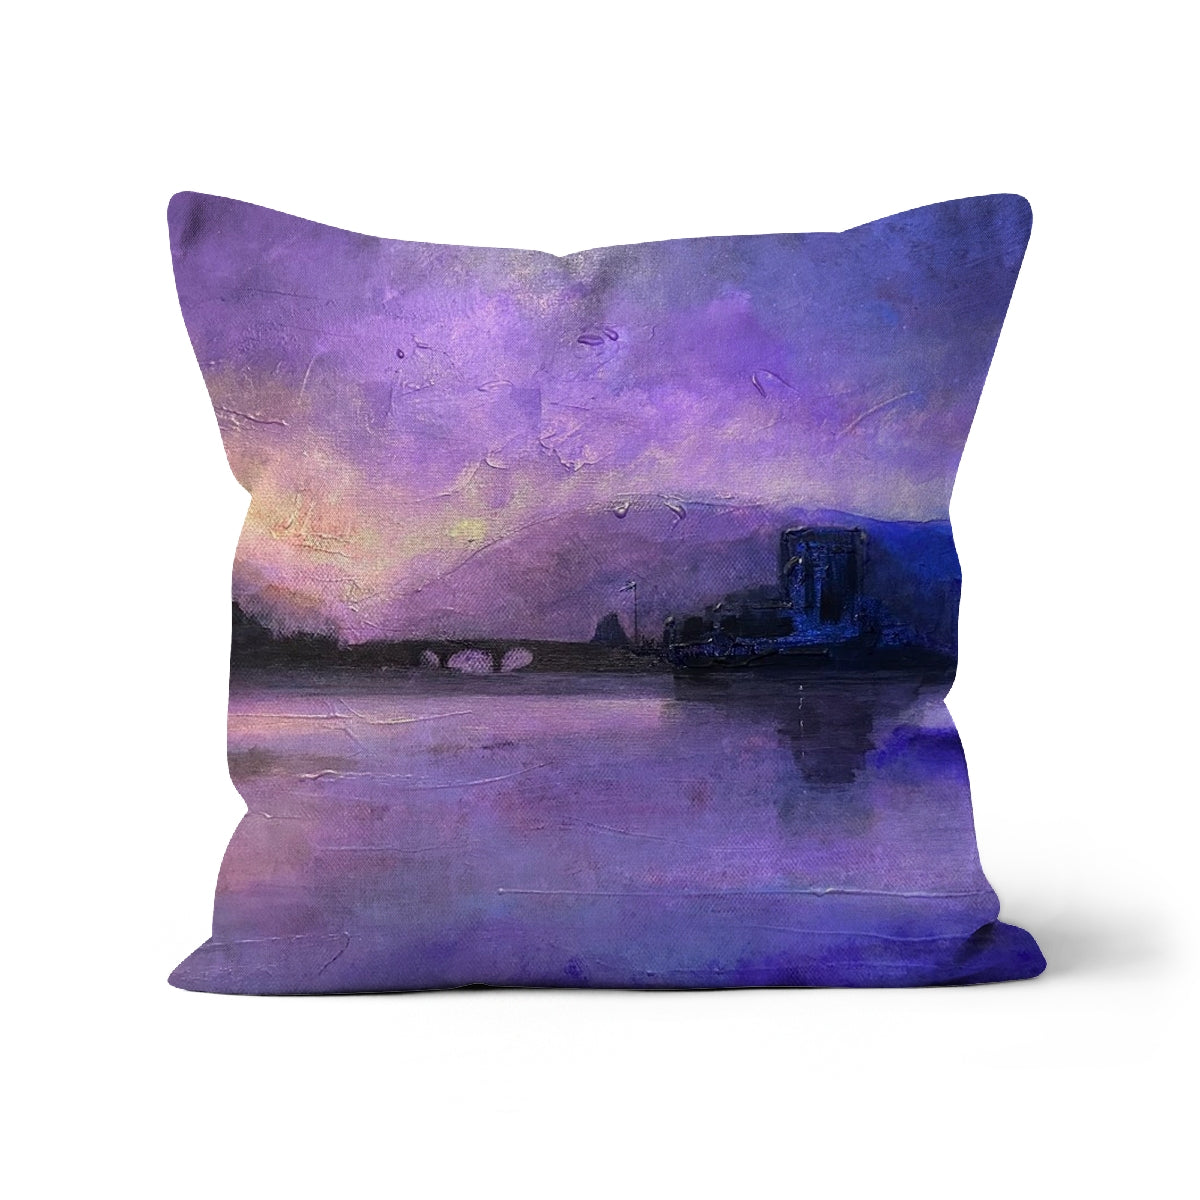 Eilean Donan Castle Moonset Art Gifts Cushion-Cushions-Historic & Iconic Scotland Art Gallery-Linen-24"x24"-Paintings, Prints, Homeware, Art Gifts From Scotland By Scottish Artist Kevin Hunter